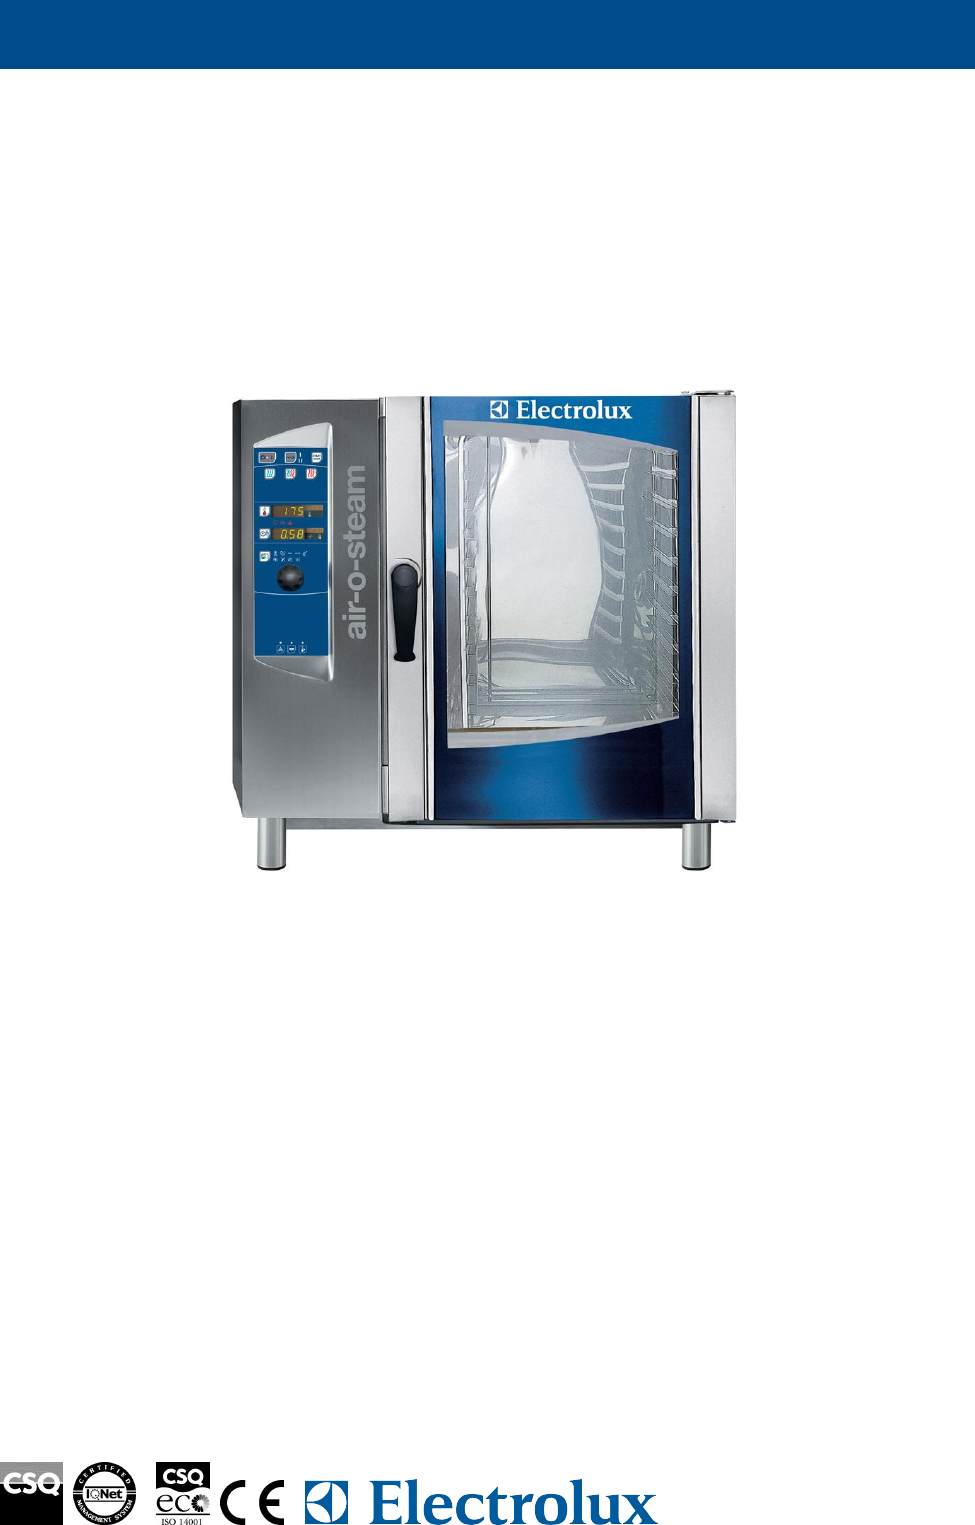 ELECTROLUX AIR-O-STEAM COMMERCIAL KITCHEN ELECTRIC COMBI STEAM OVEN GN2/1  in Campbellfield, Australia